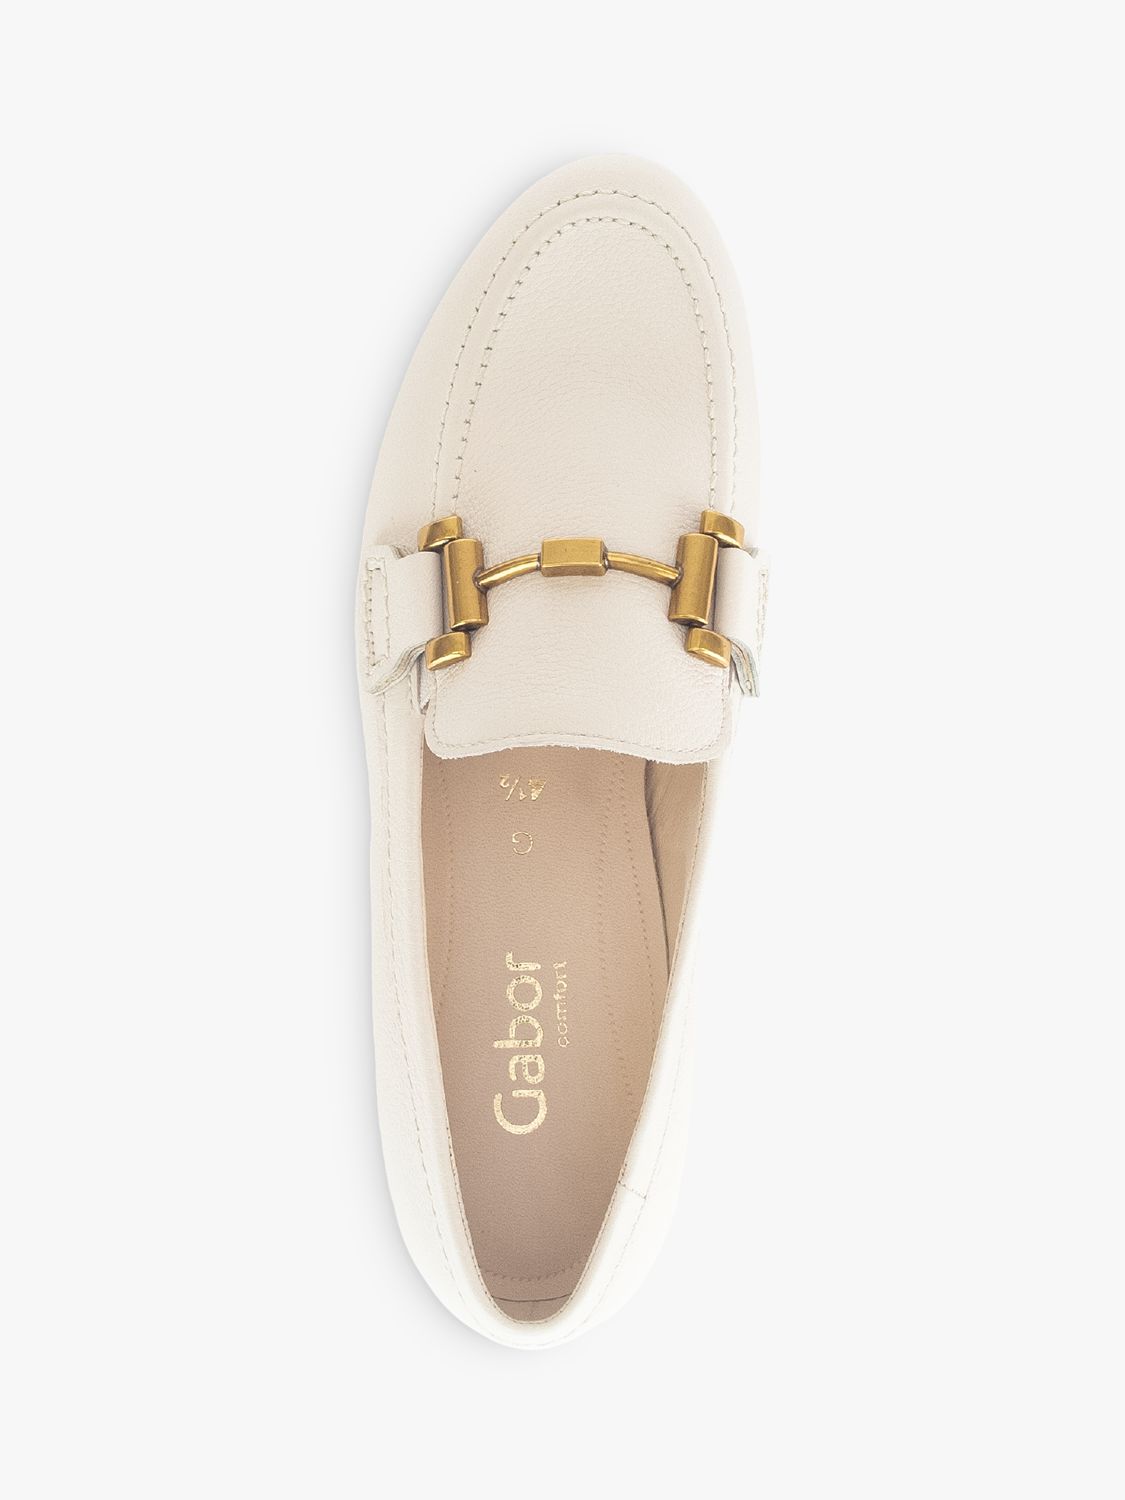 Gabor Destiny Wide Fit Leather Slip On Loafers, Crème at John Lewis ...